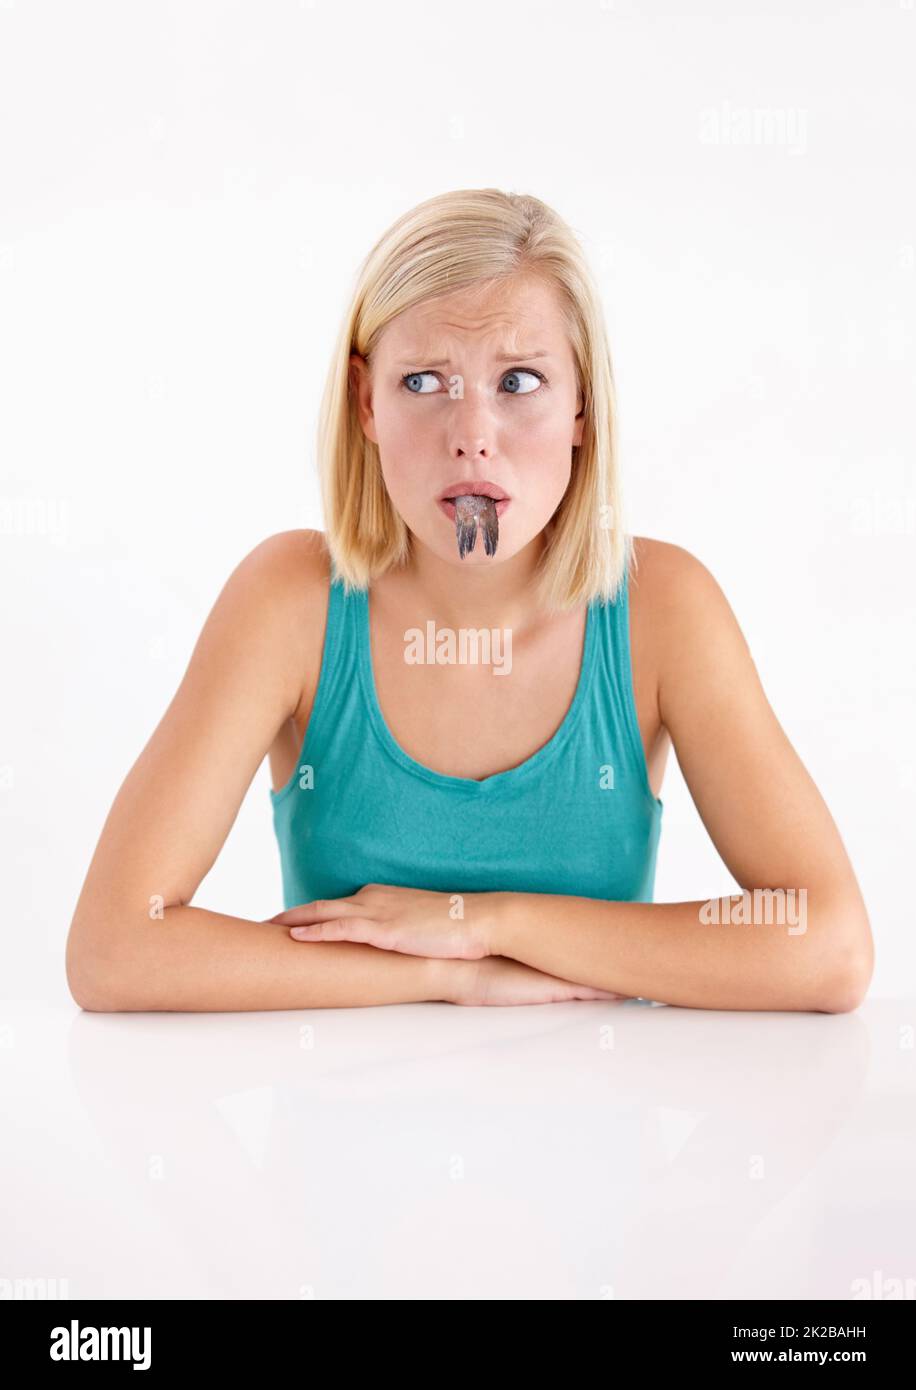 Ill eat it if I have to. A young woman pulling a face with a fish in her mouth. Stock Photo